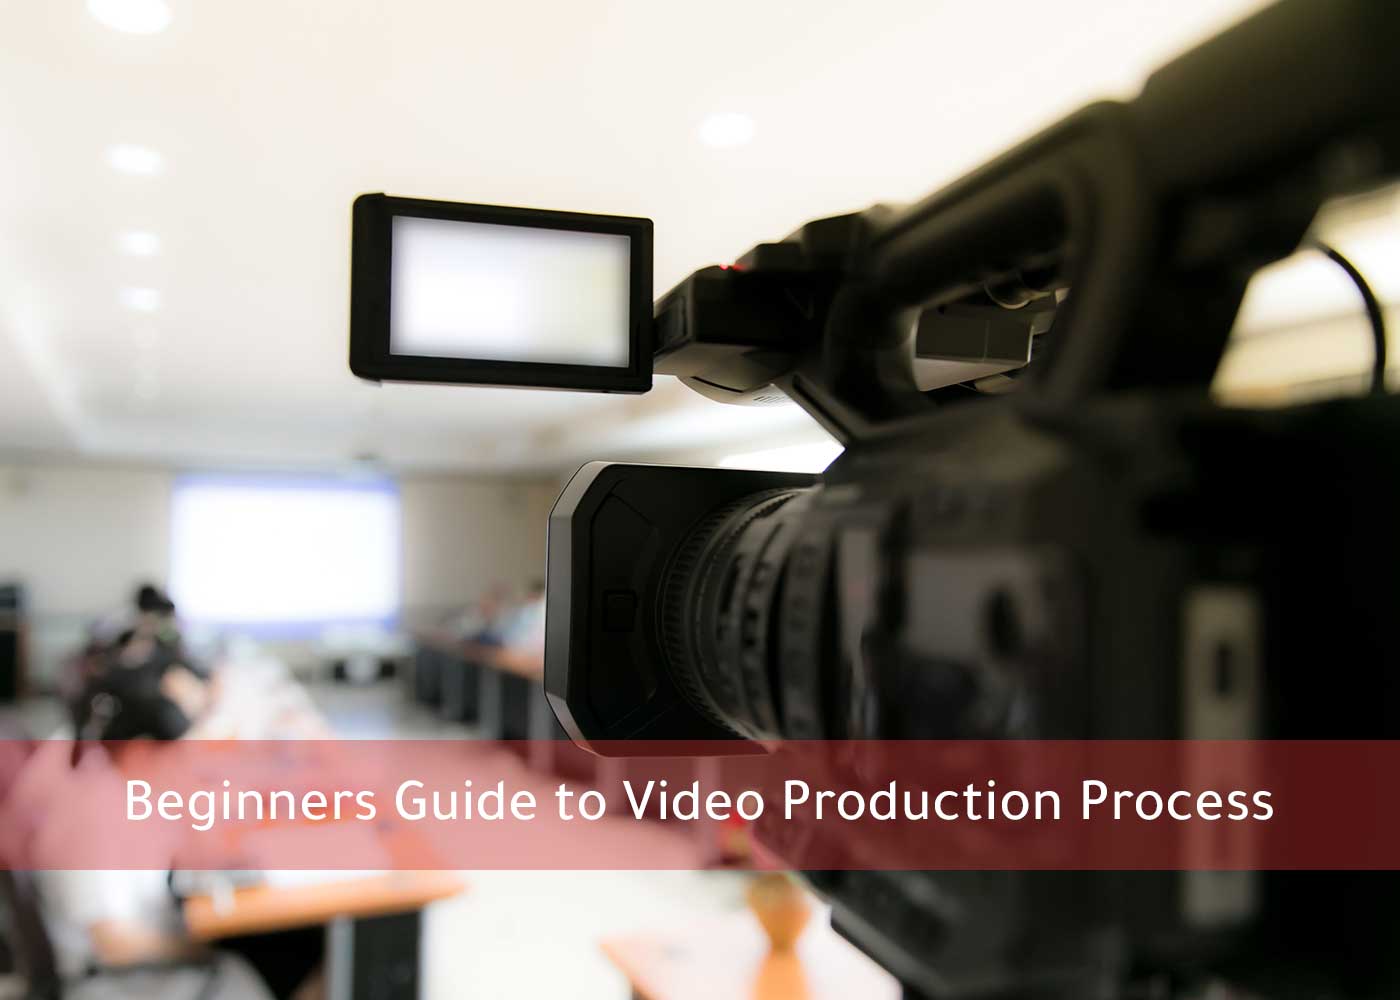 Video production: A beginner's guide